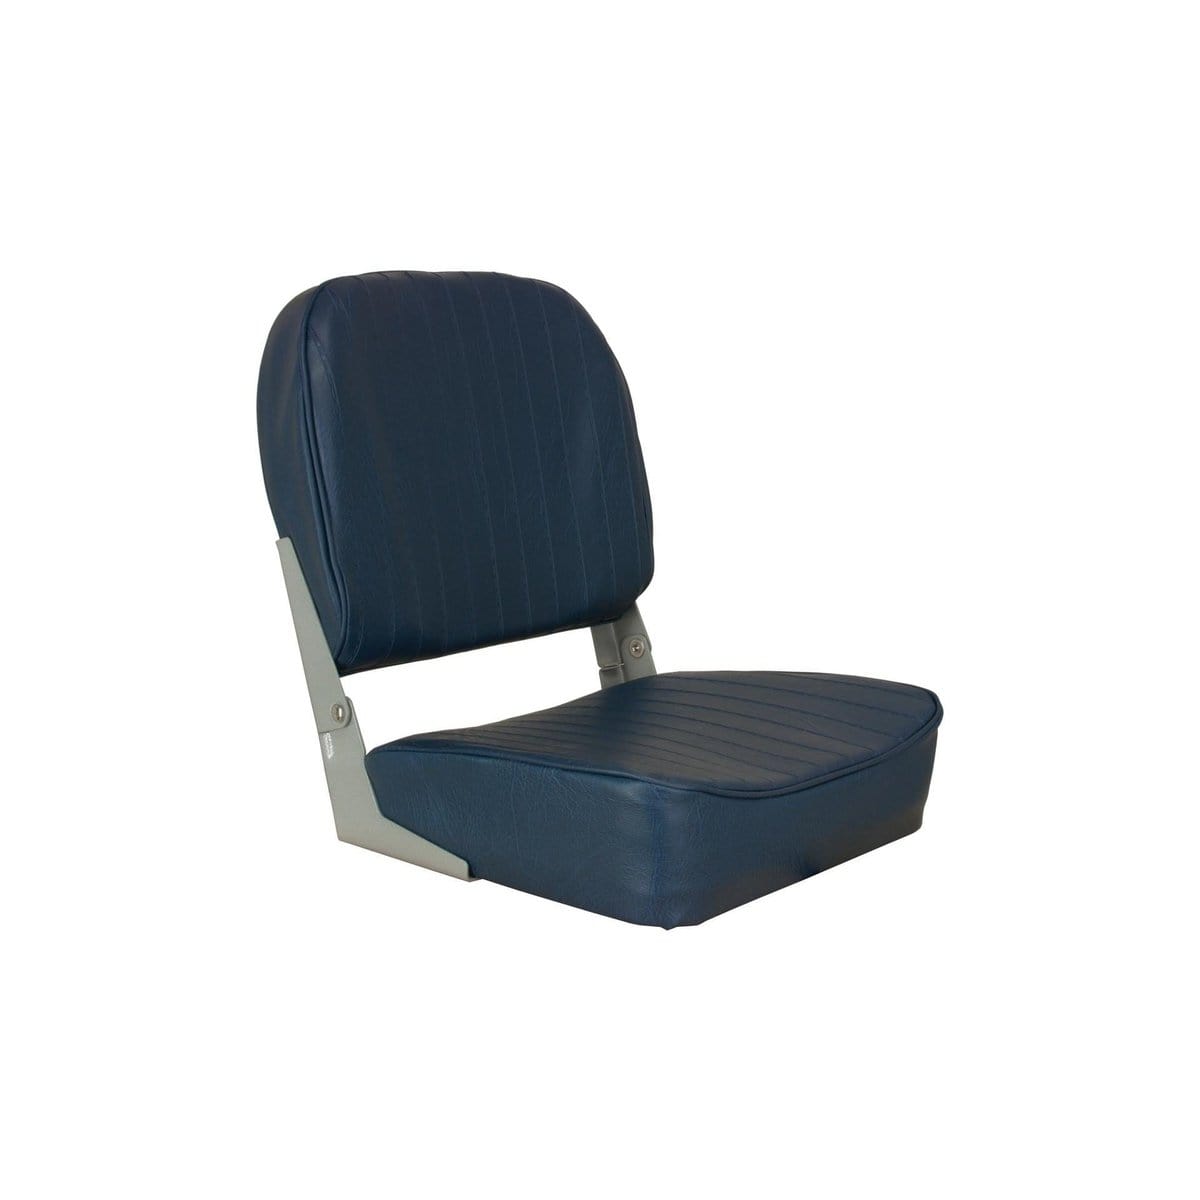 Springfield Not Qualified for Free Shipping Springfield Economy Seat Blue #1040621